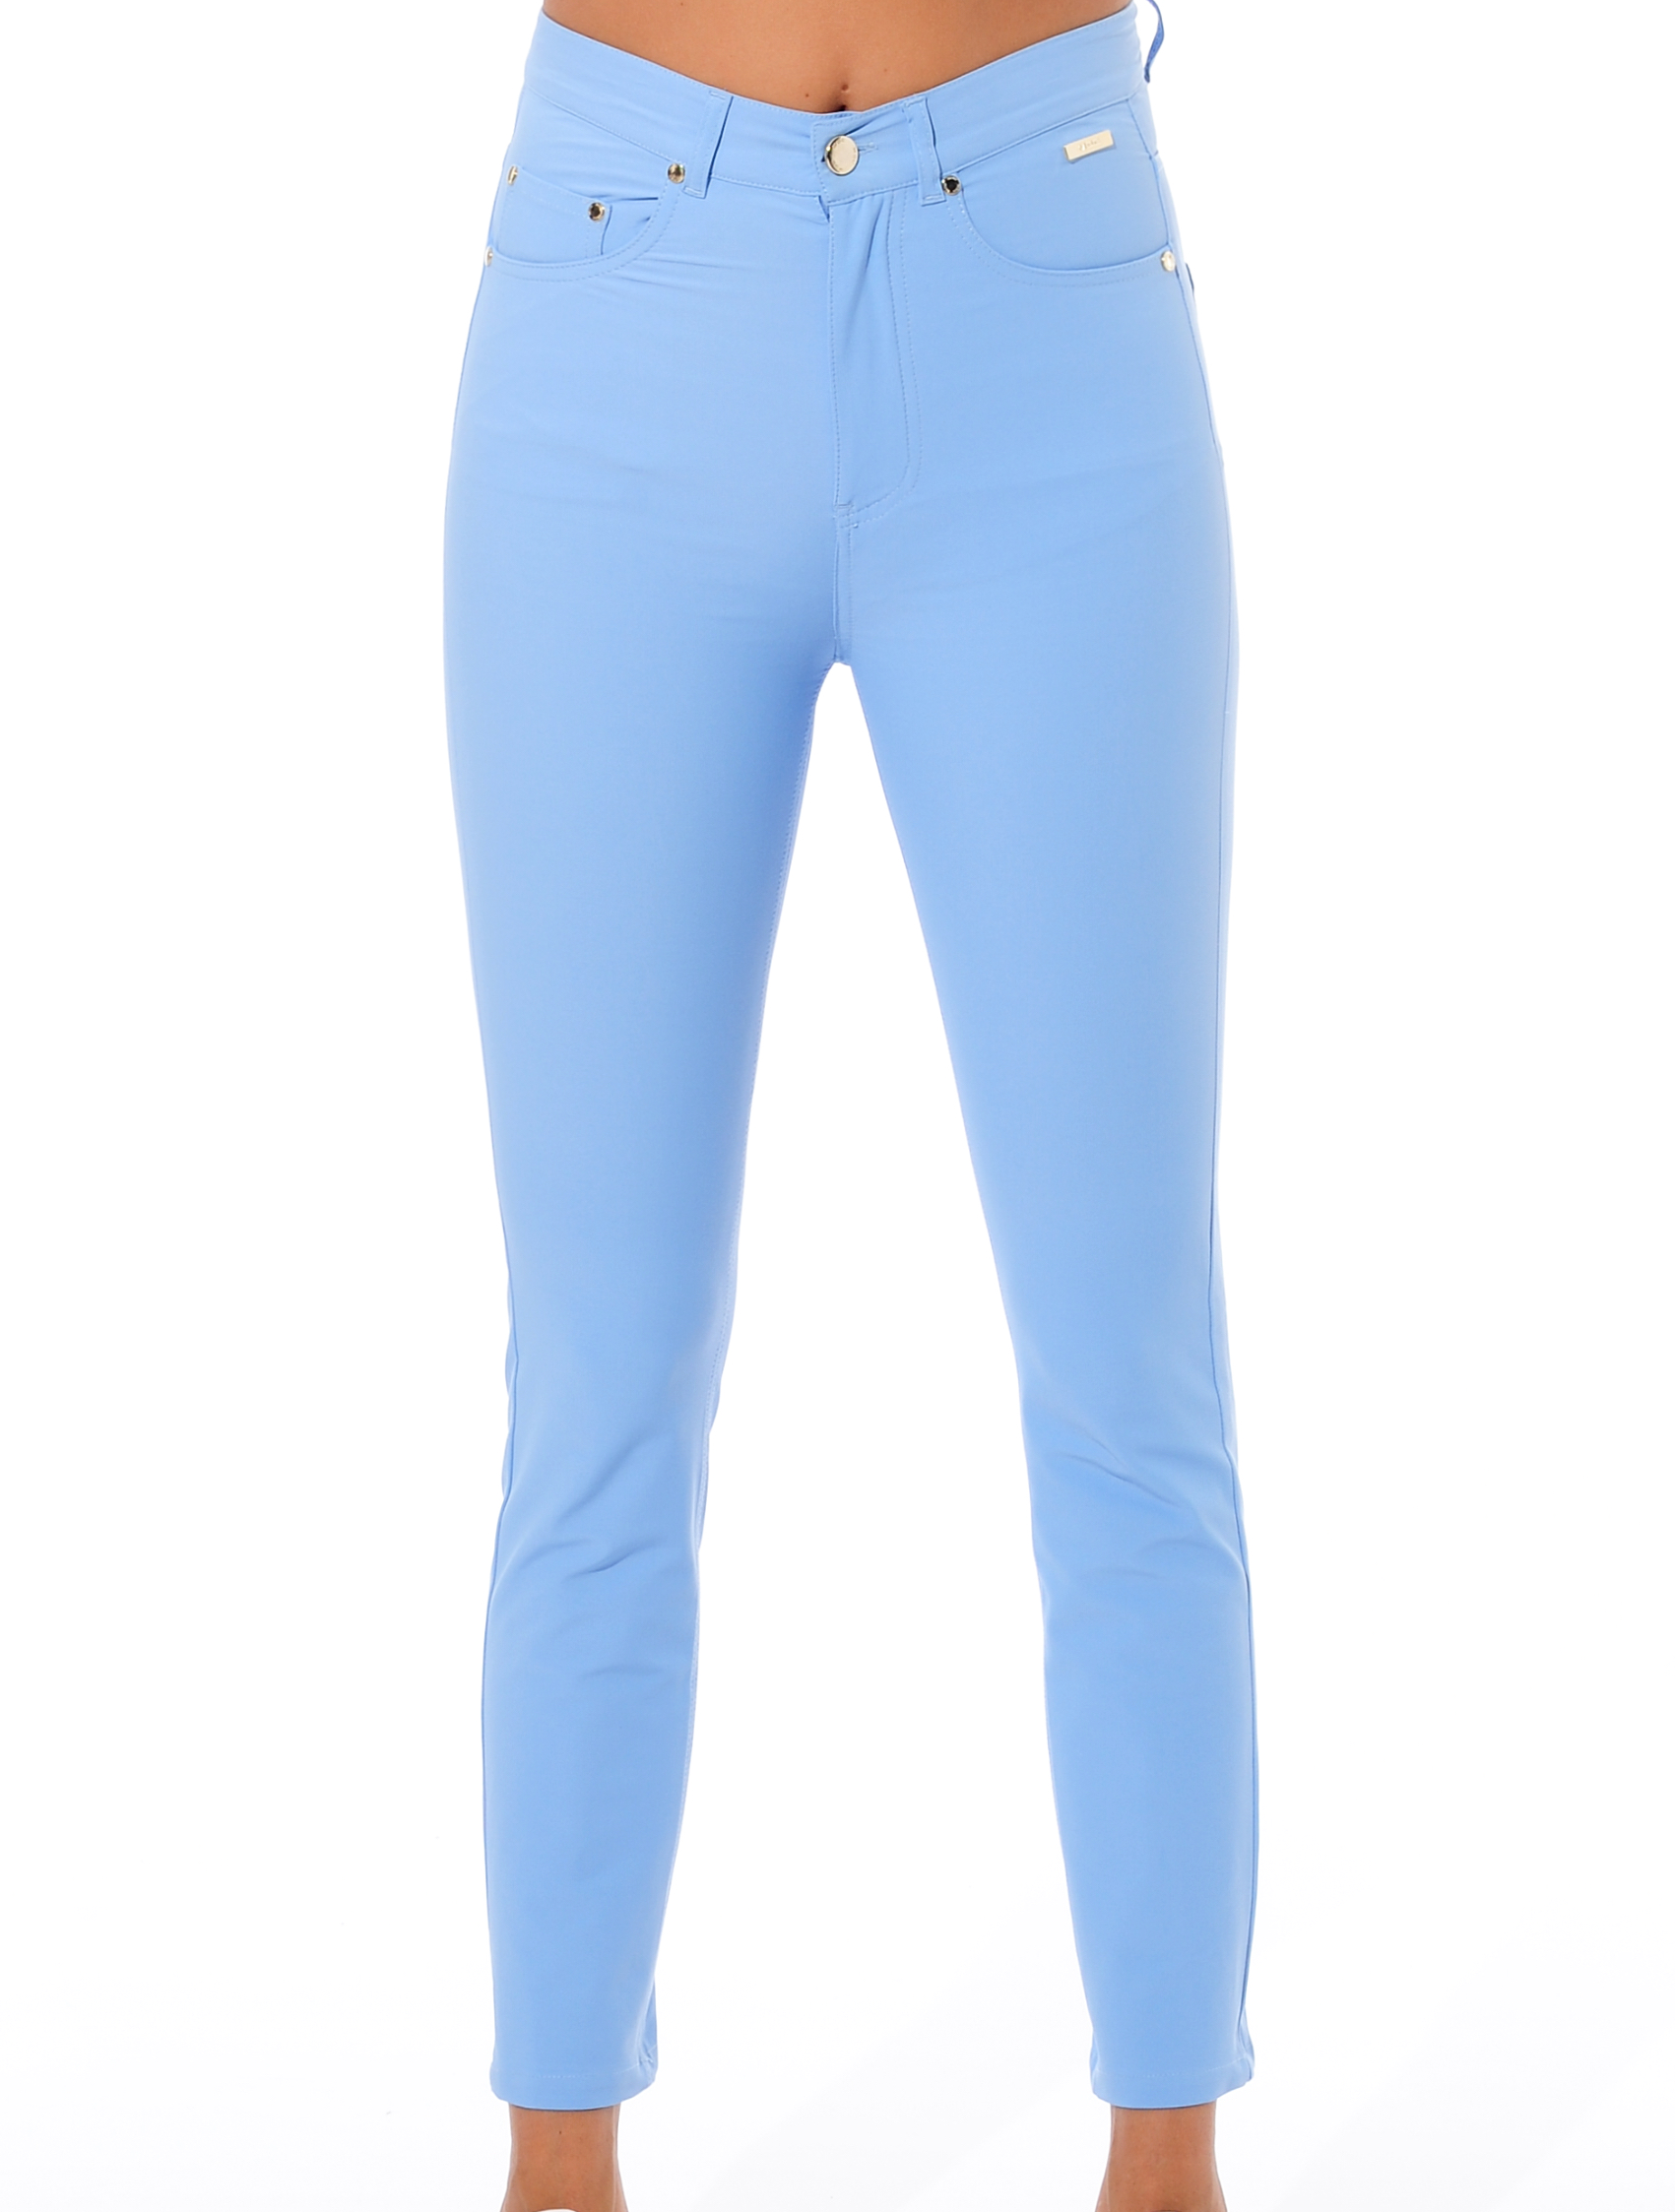 4way stretch high waist ankle pants baby blue 